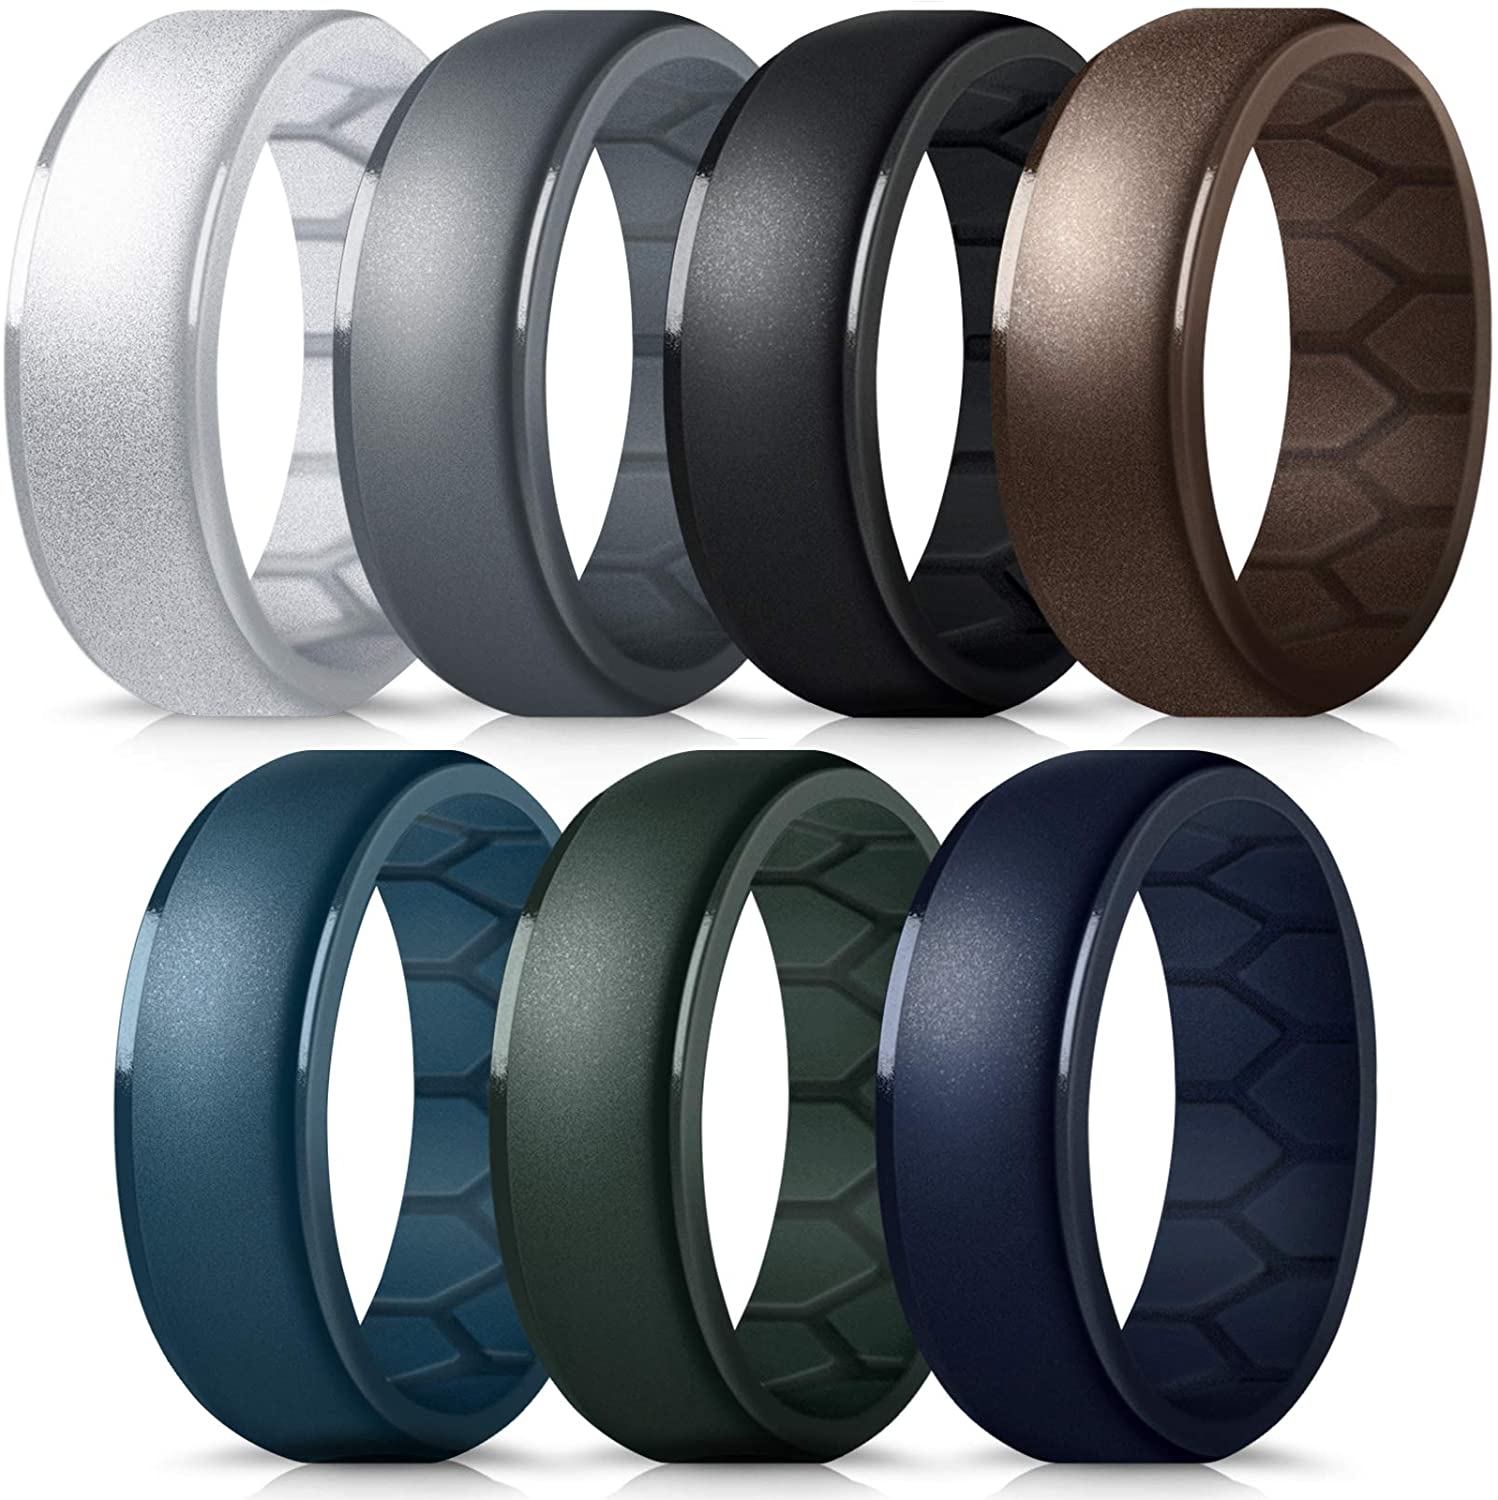 Forthee Silicone Wedding Ring for Men